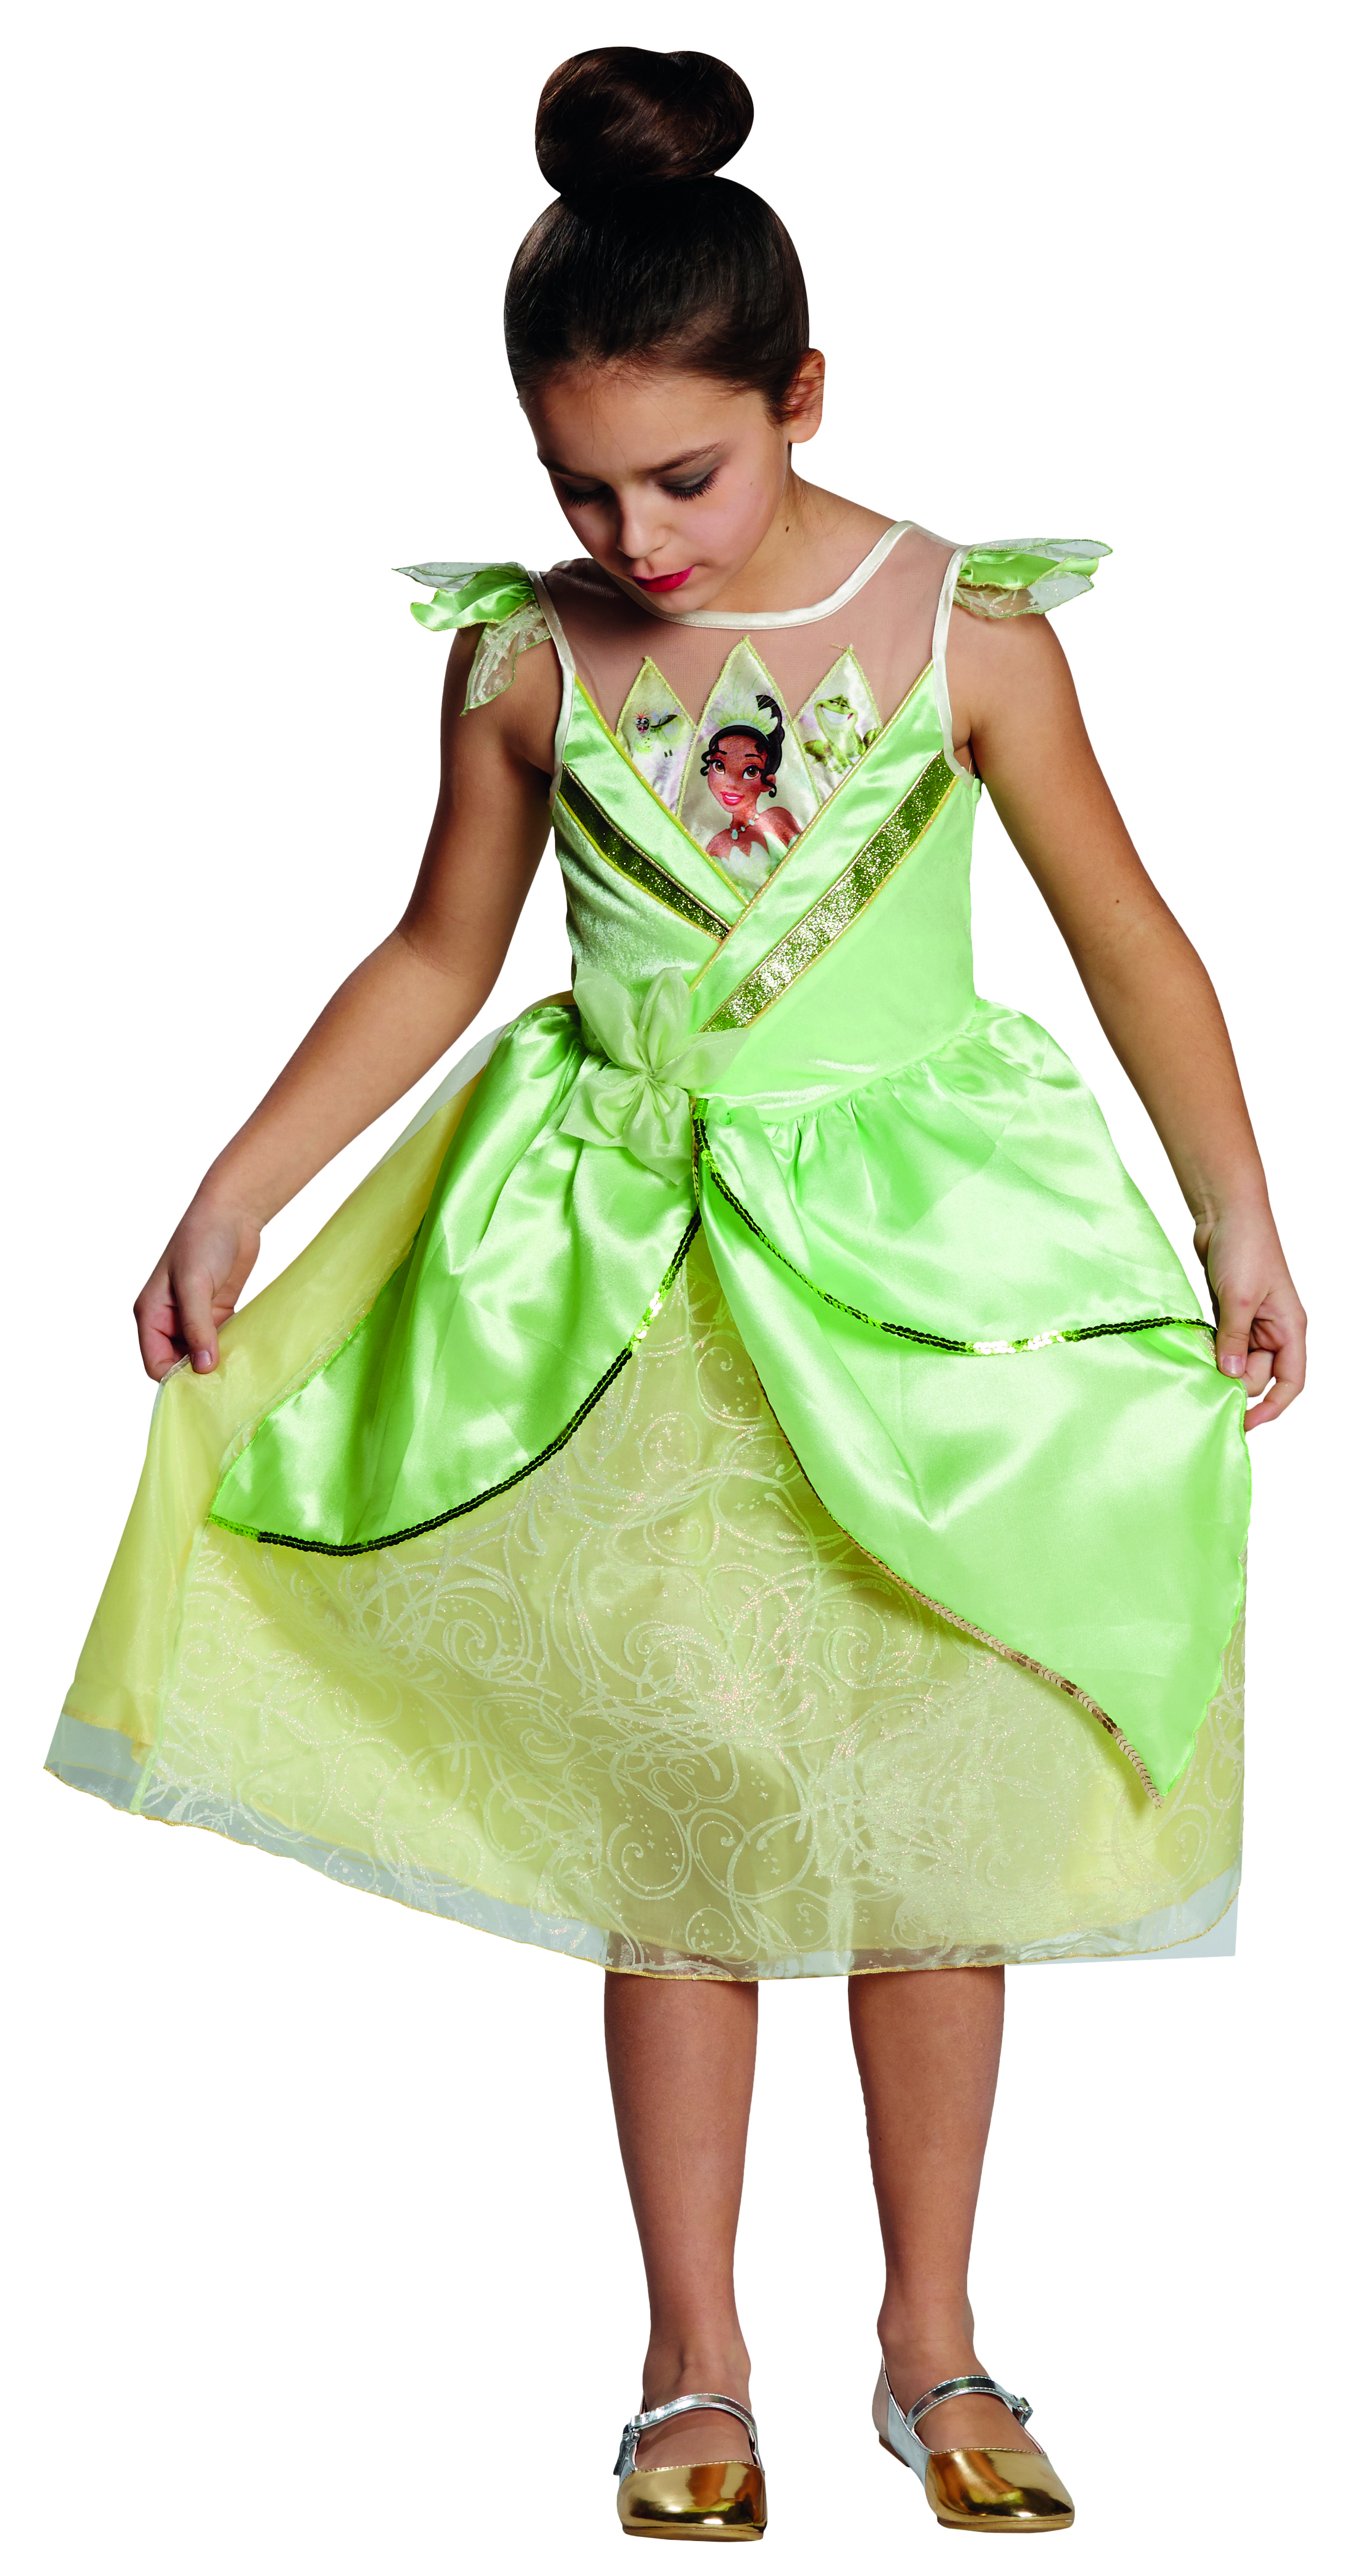 Jurk Tiana Shimmer uit Disney's The Princess and the Frog